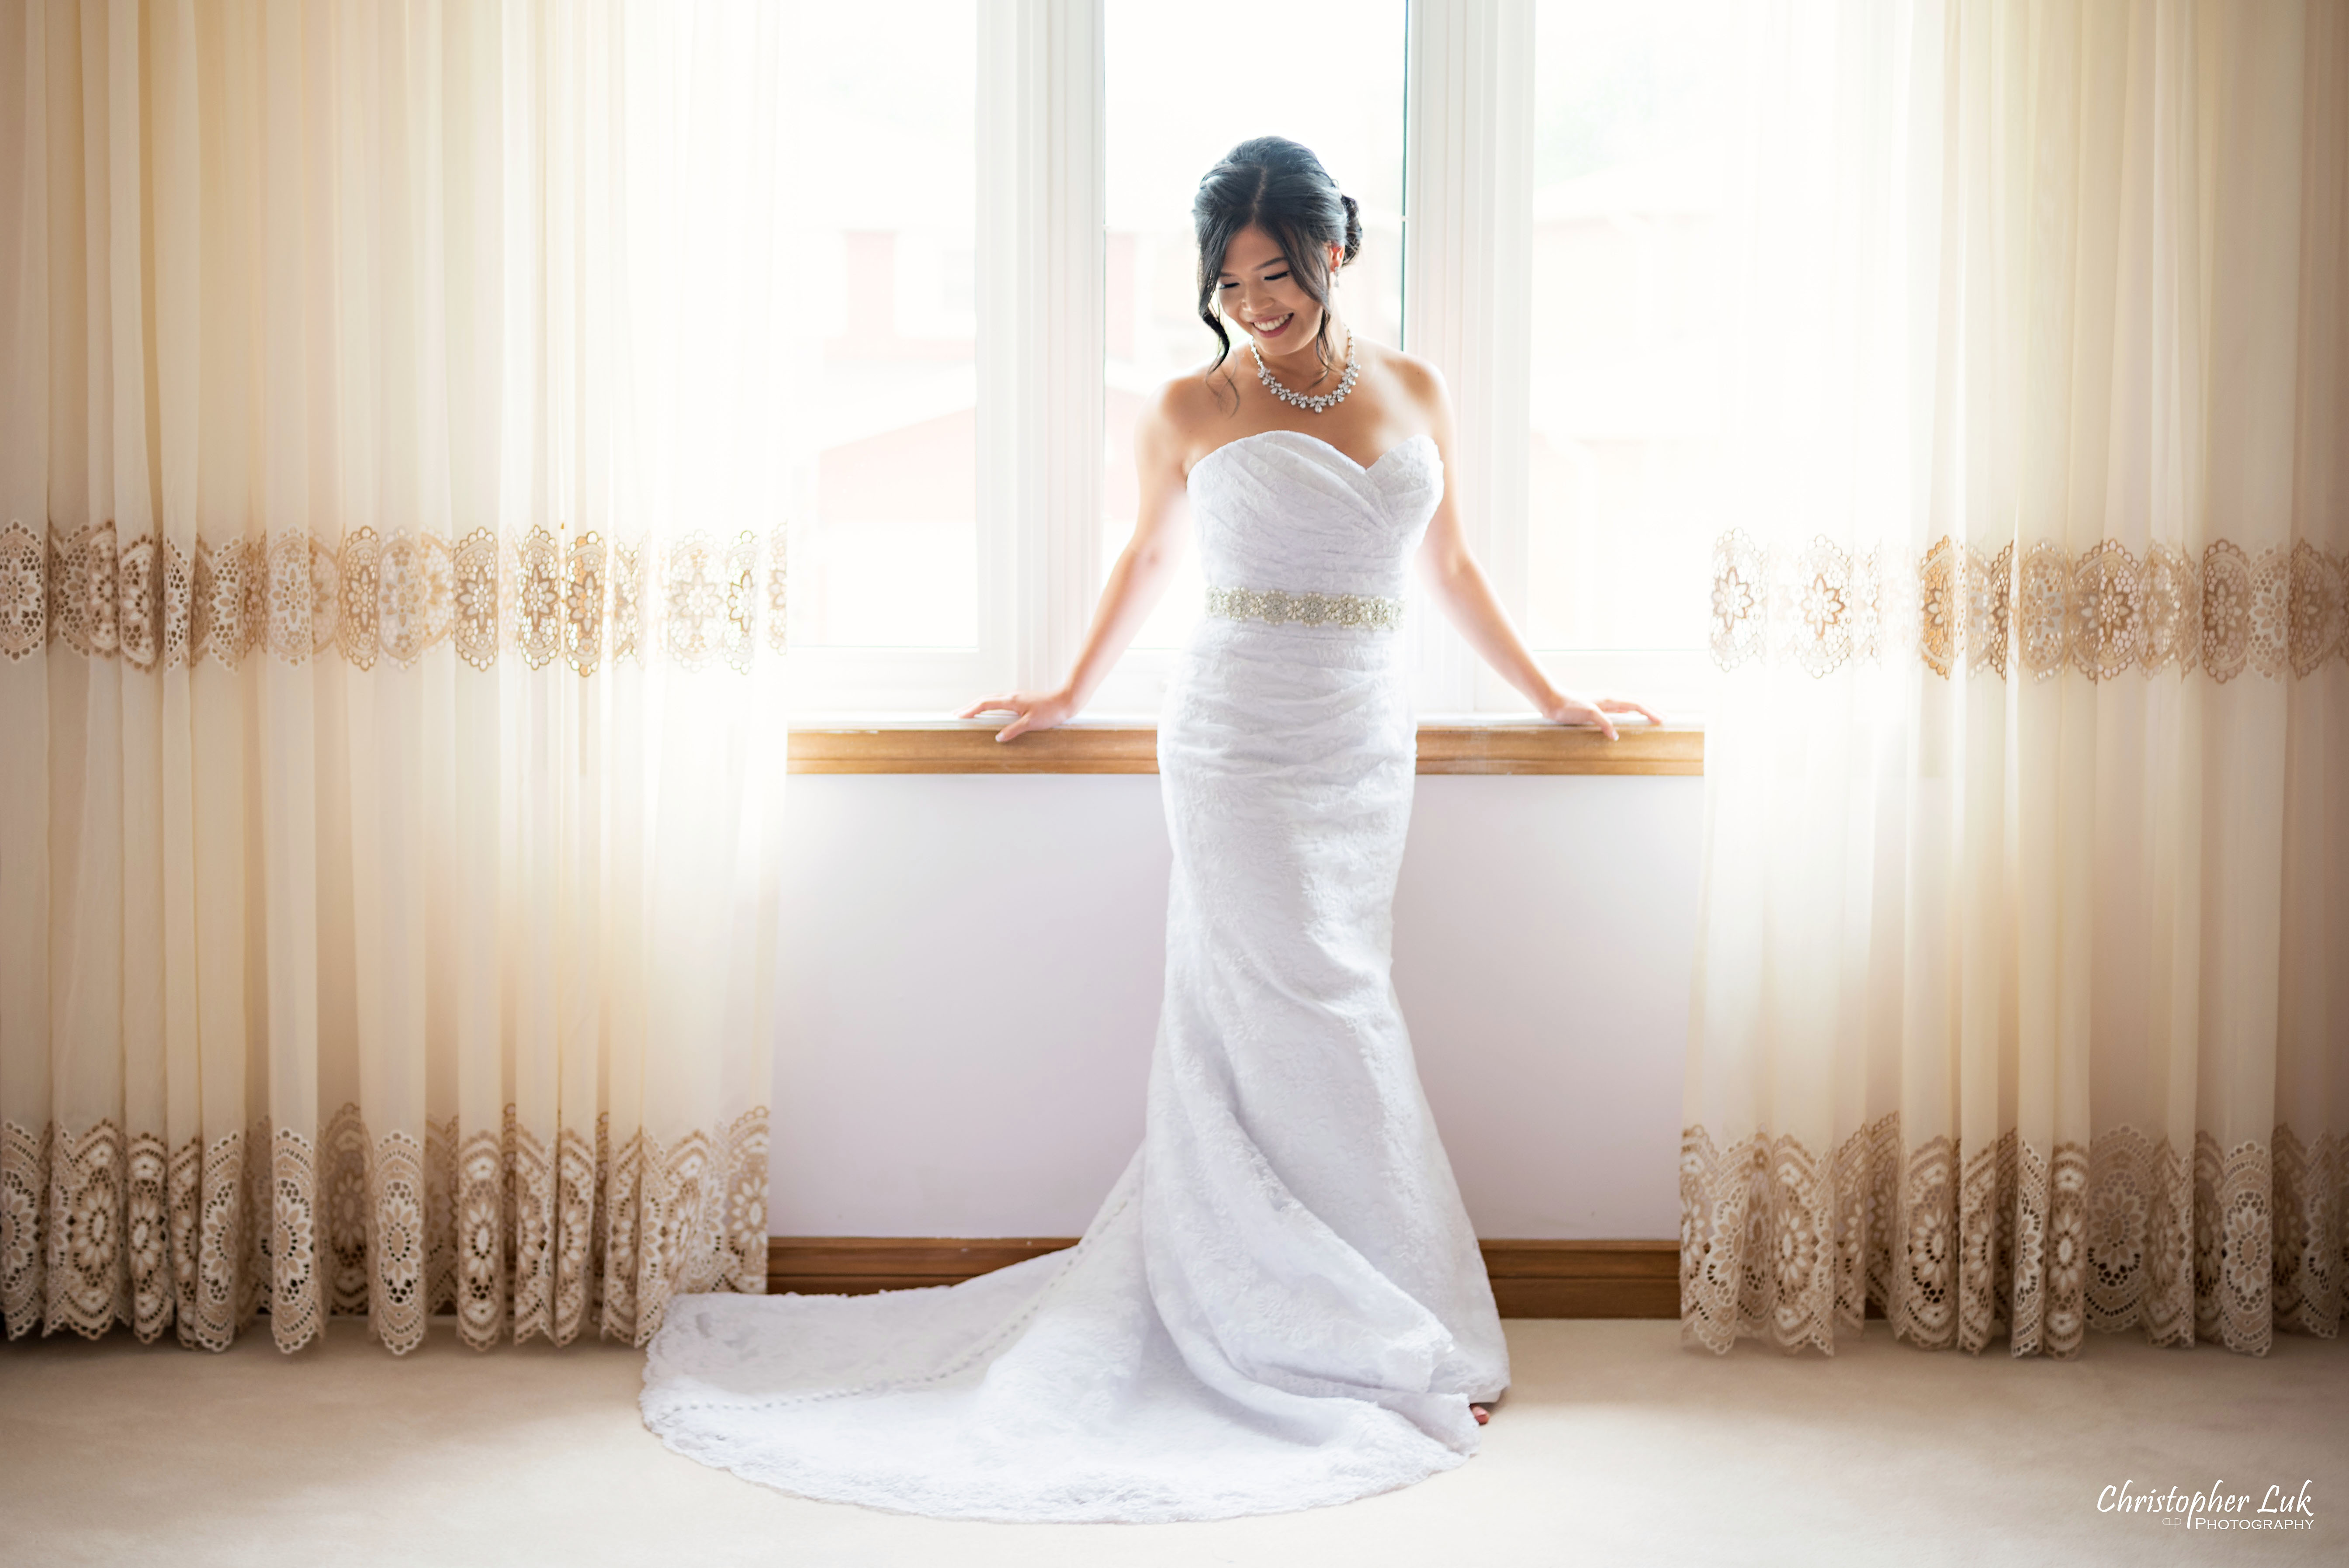 Christopher Luk - Toronto Wedding Photographer - Markham Home Private Residence Bride Alfred Angelo from Joanna’s Bridal Natural Candid Photojournalistic Creative Curtains Wide Portrait Composition Frame Framing